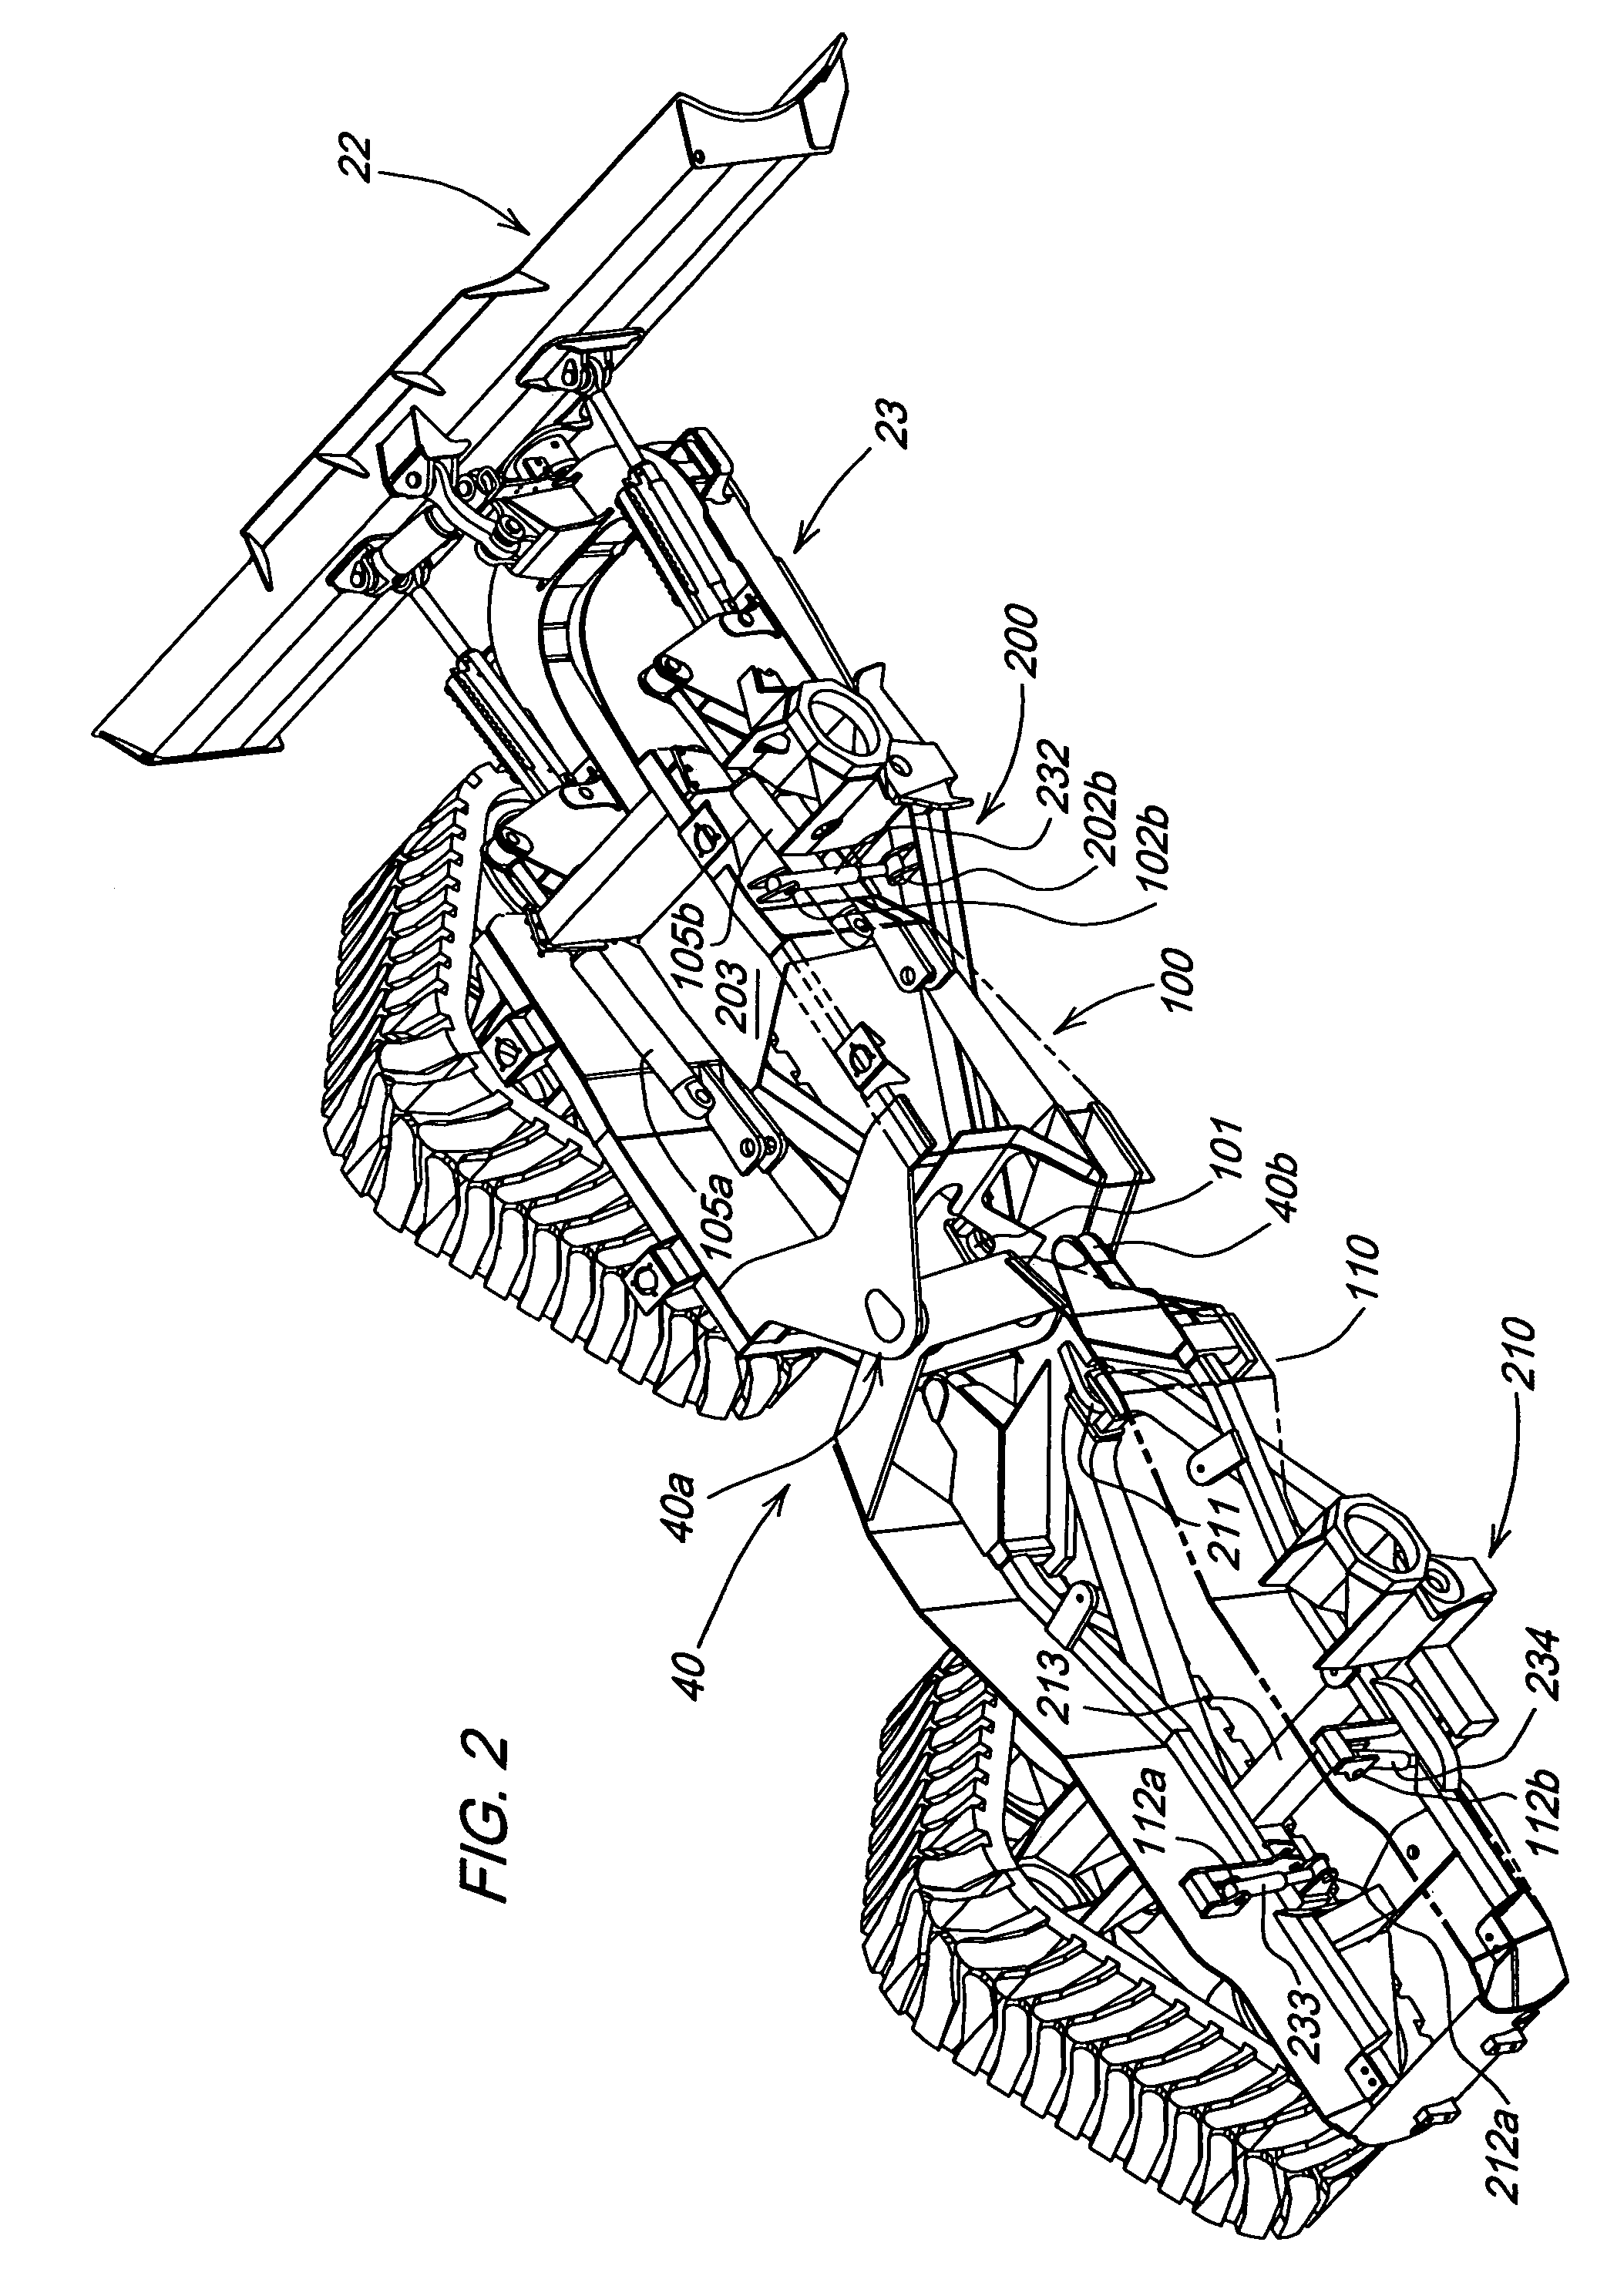 Articulated crawler dozer with direct load path structure